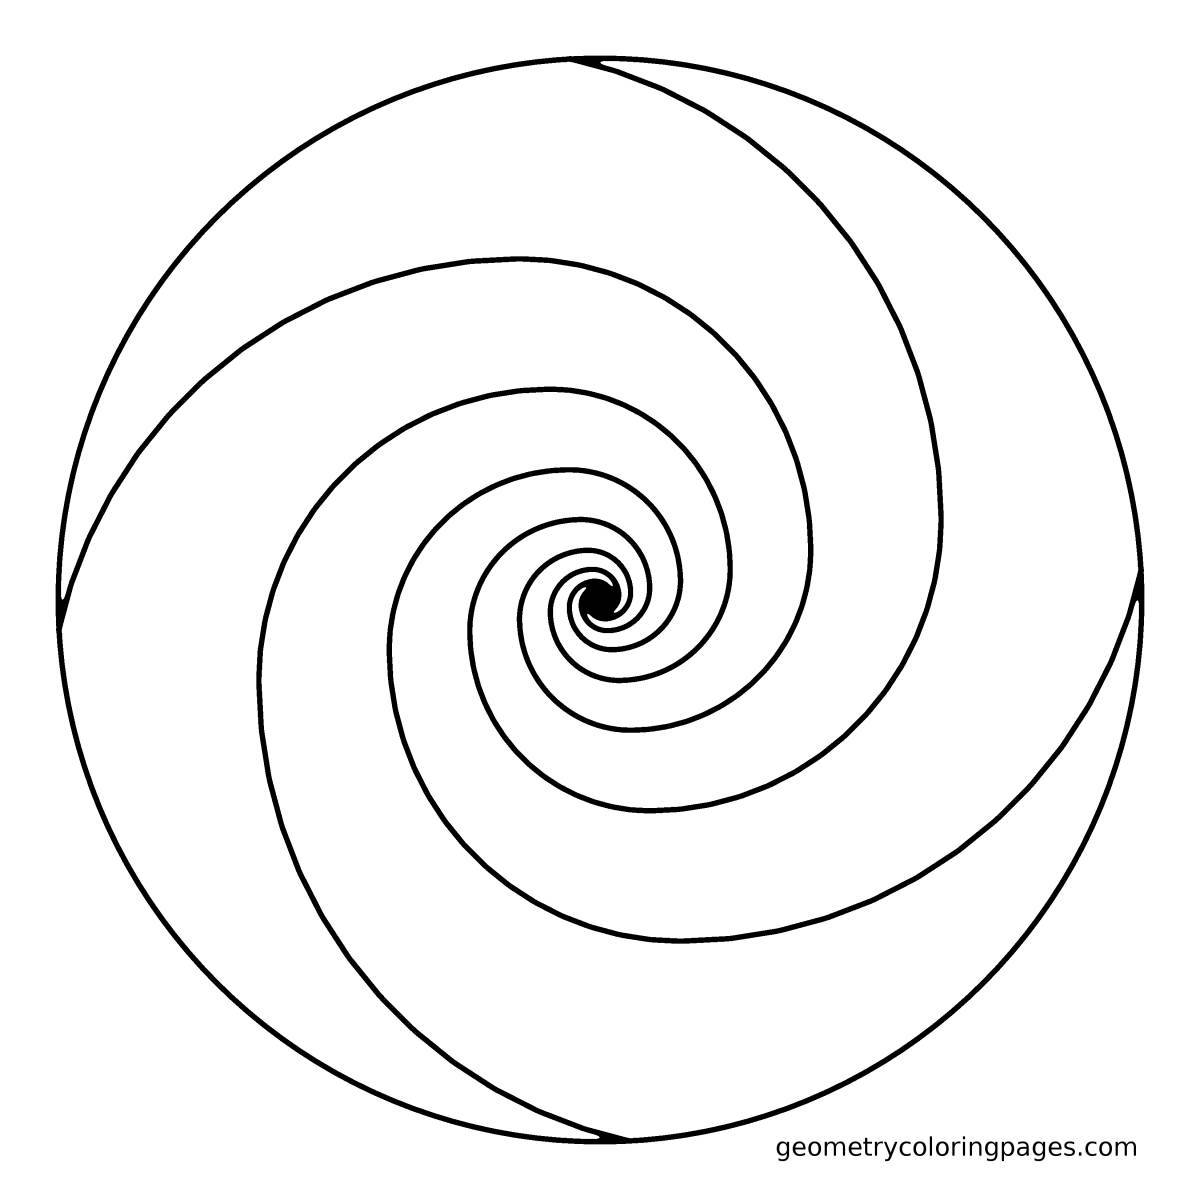 Amazing spiral drawing coloring book